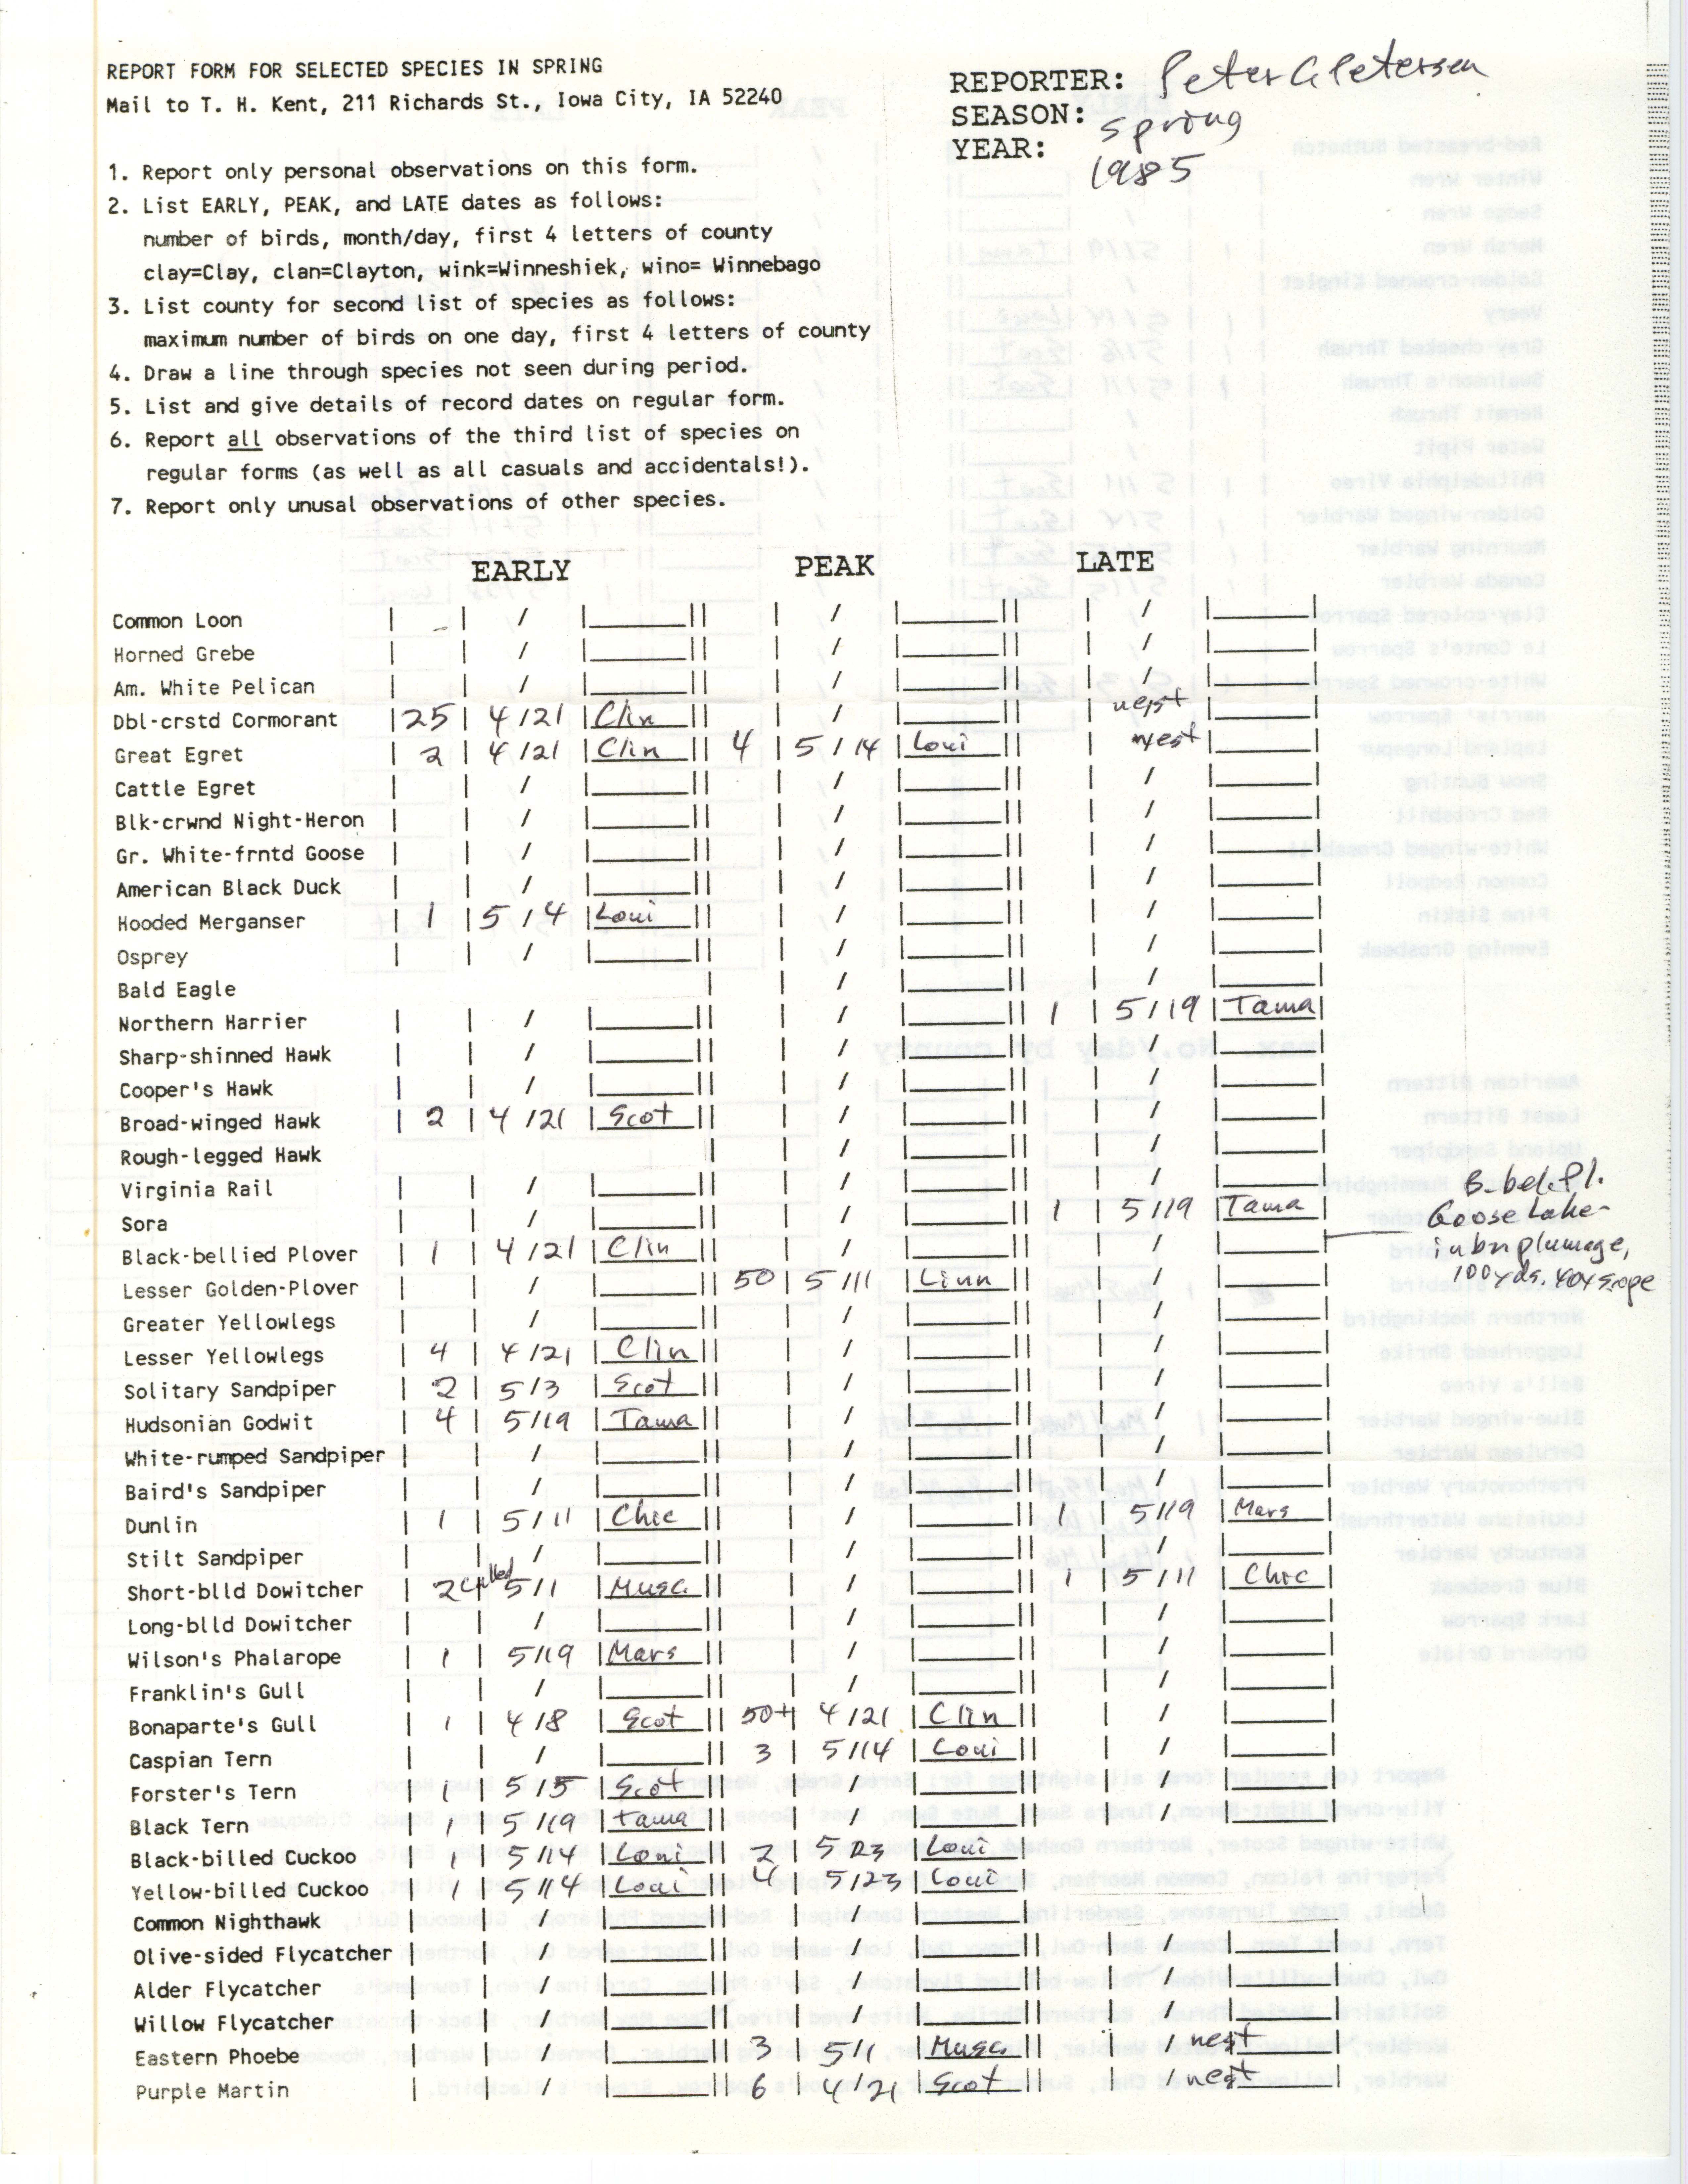 Report form for selected species in spring, contributed by Peter C. Petersen, spring 1985